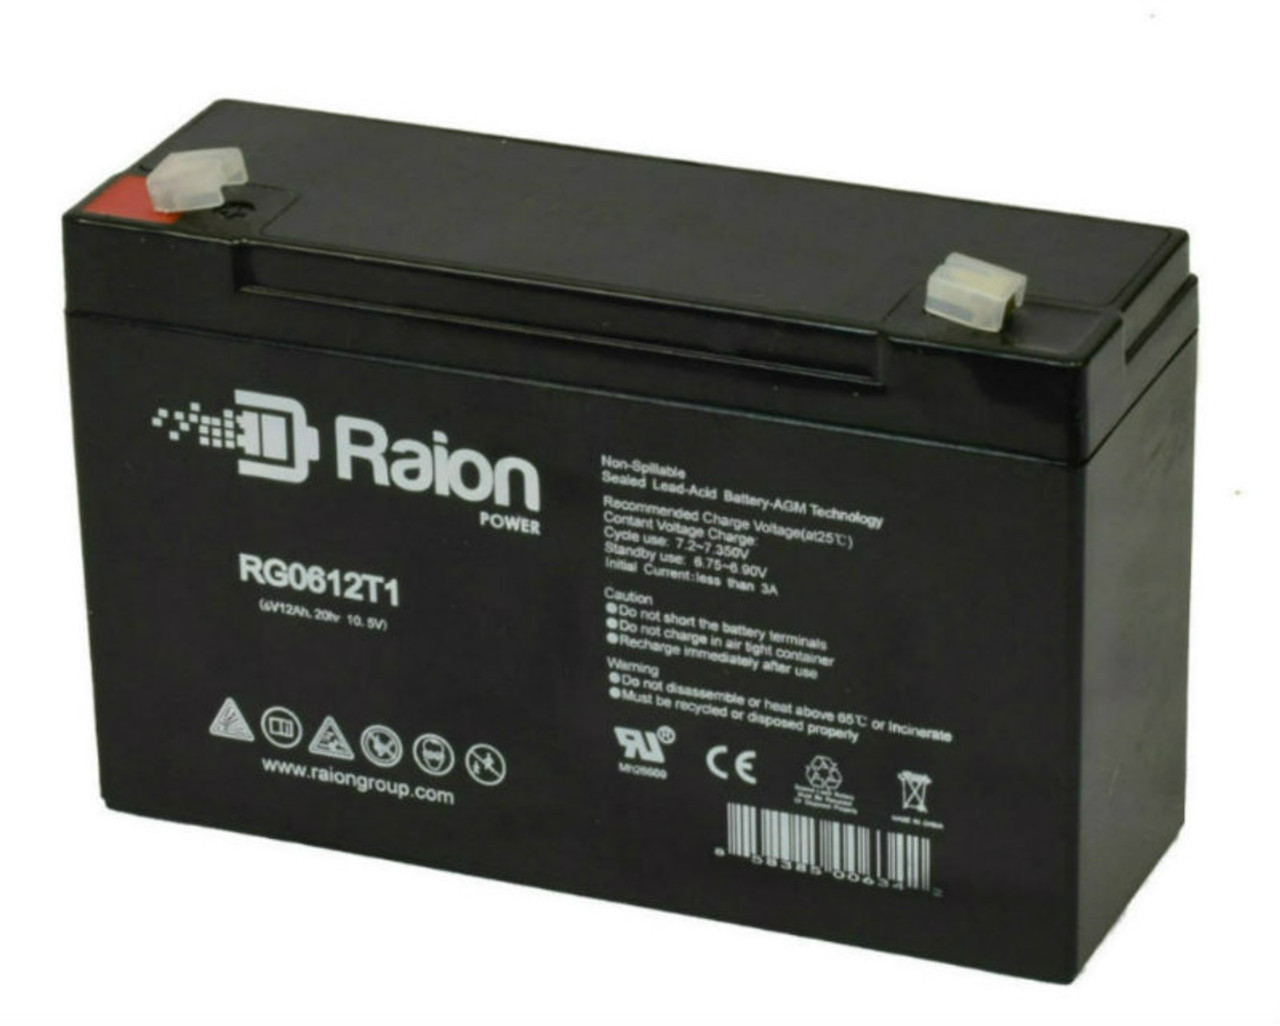 Raion Power RG06120T1 Replacement Battery for Streamlight LB40